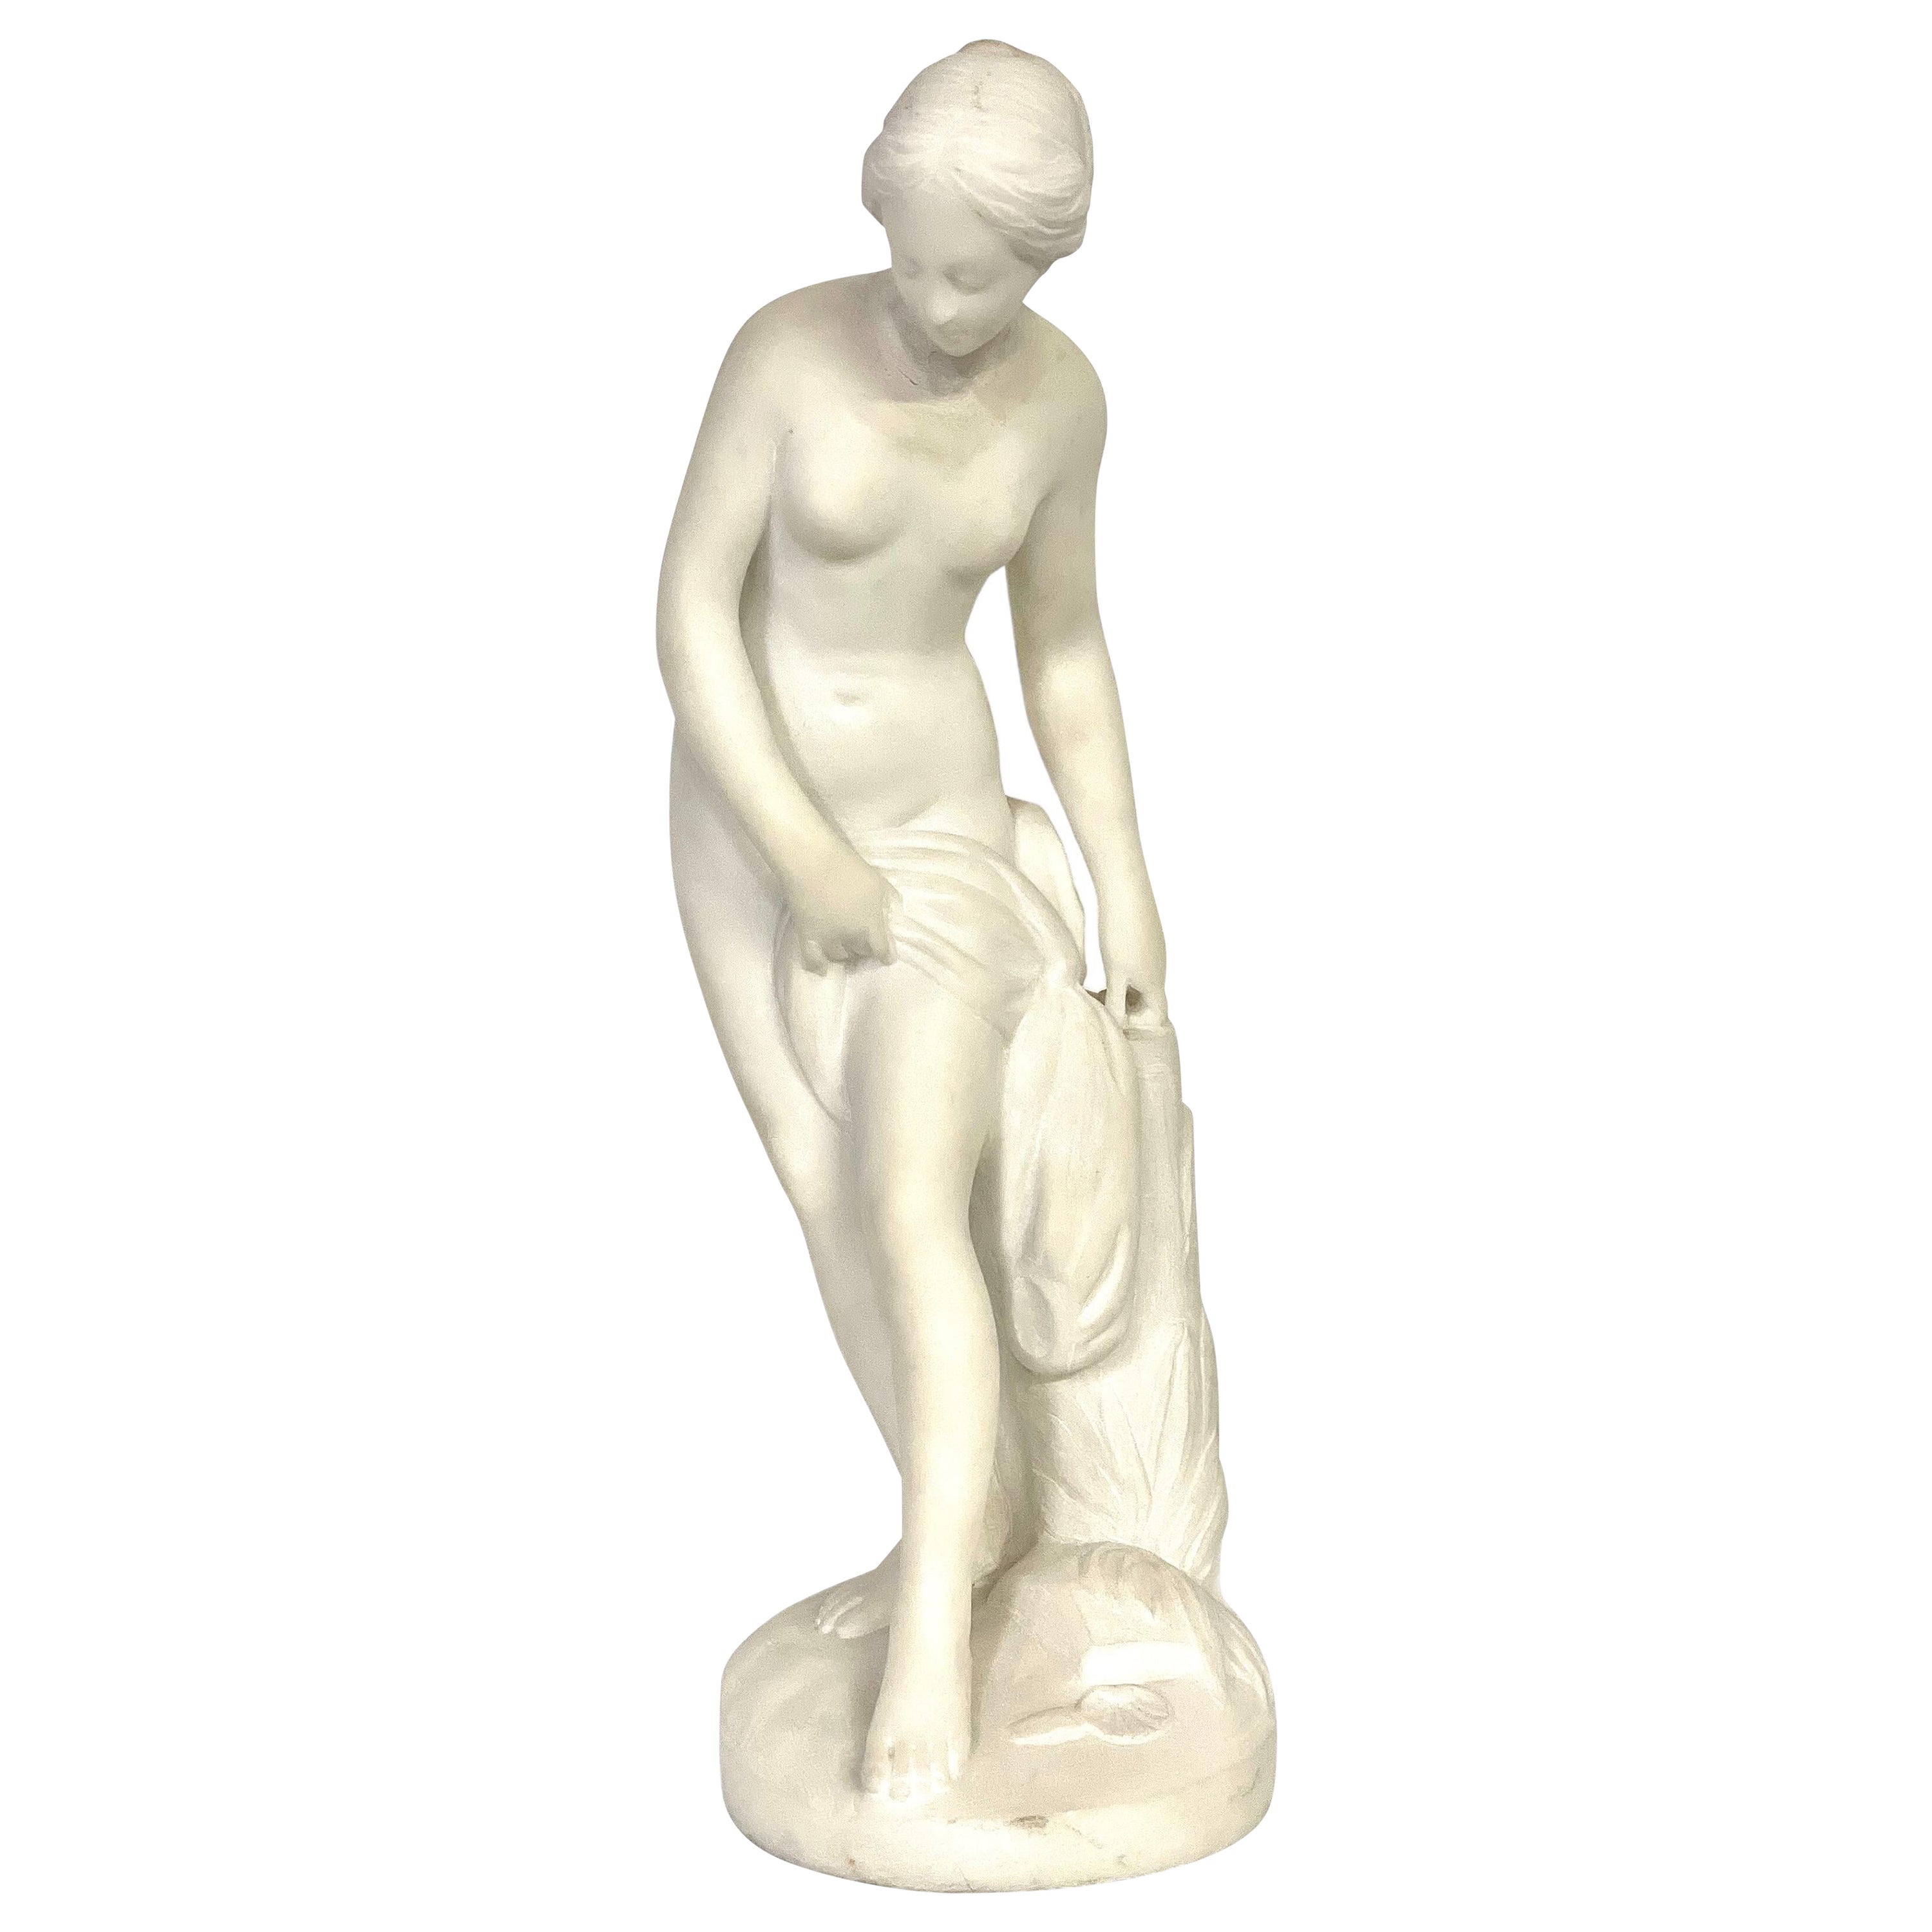 19th Century White Marble Sculpture “La Baigneuse” inspired by Falconet